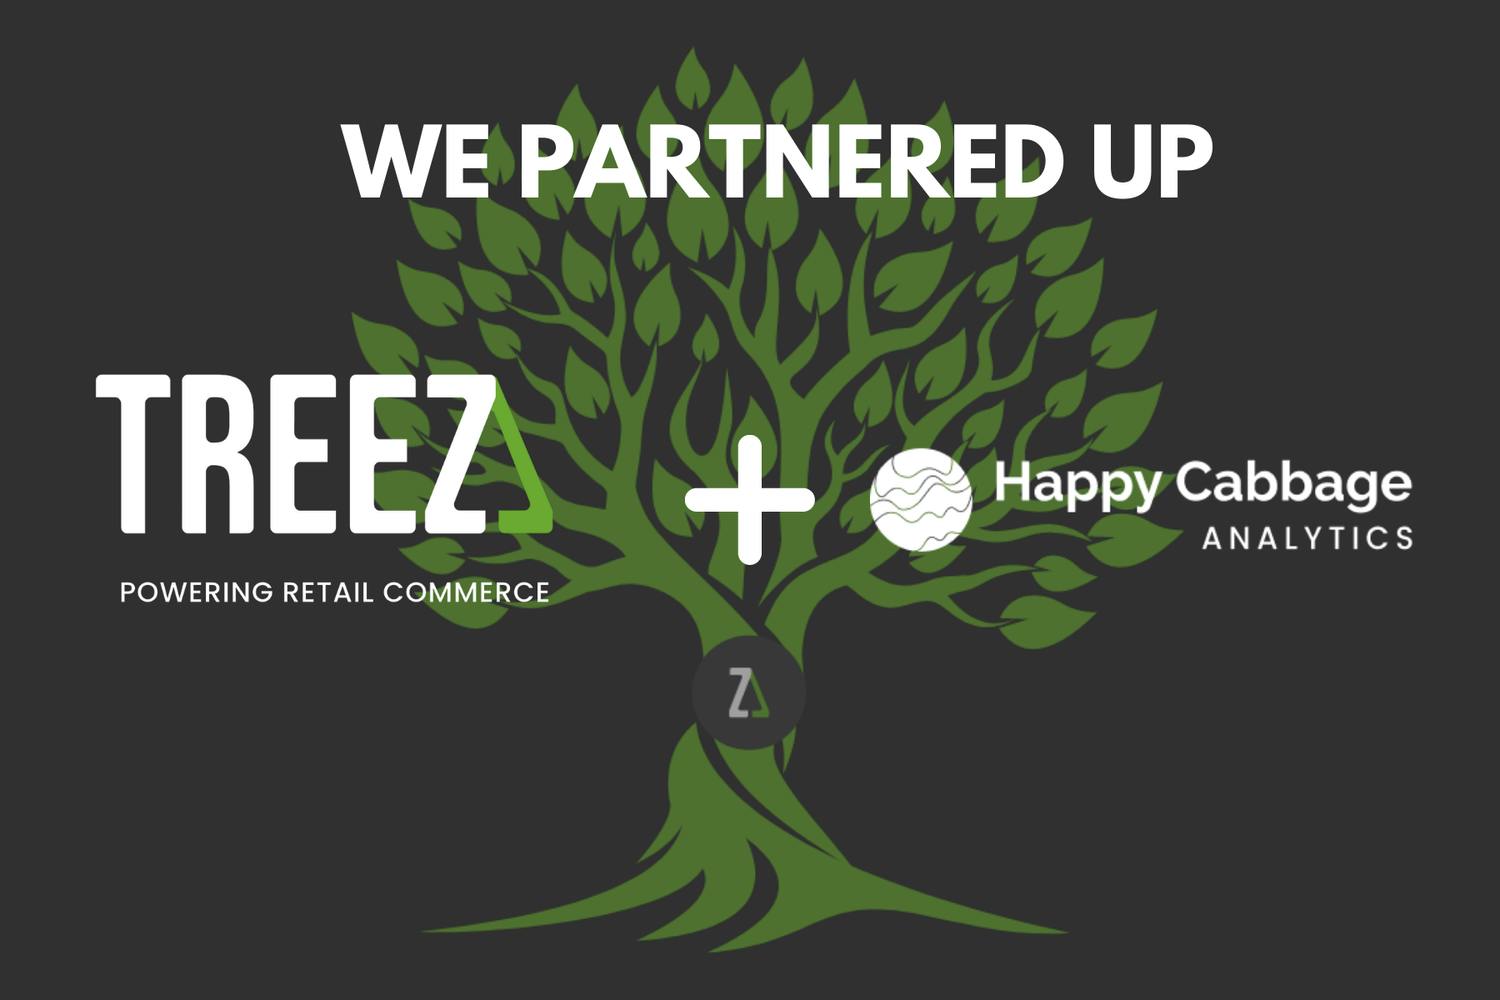 A swirling tree is behind two logos - one is the Treez, white and green with the enterprise platform of the cannabis industry and the next is a stylized head of cabbage and the wordmark Happy Cabbage Analytics. The image reads "We partnered up"